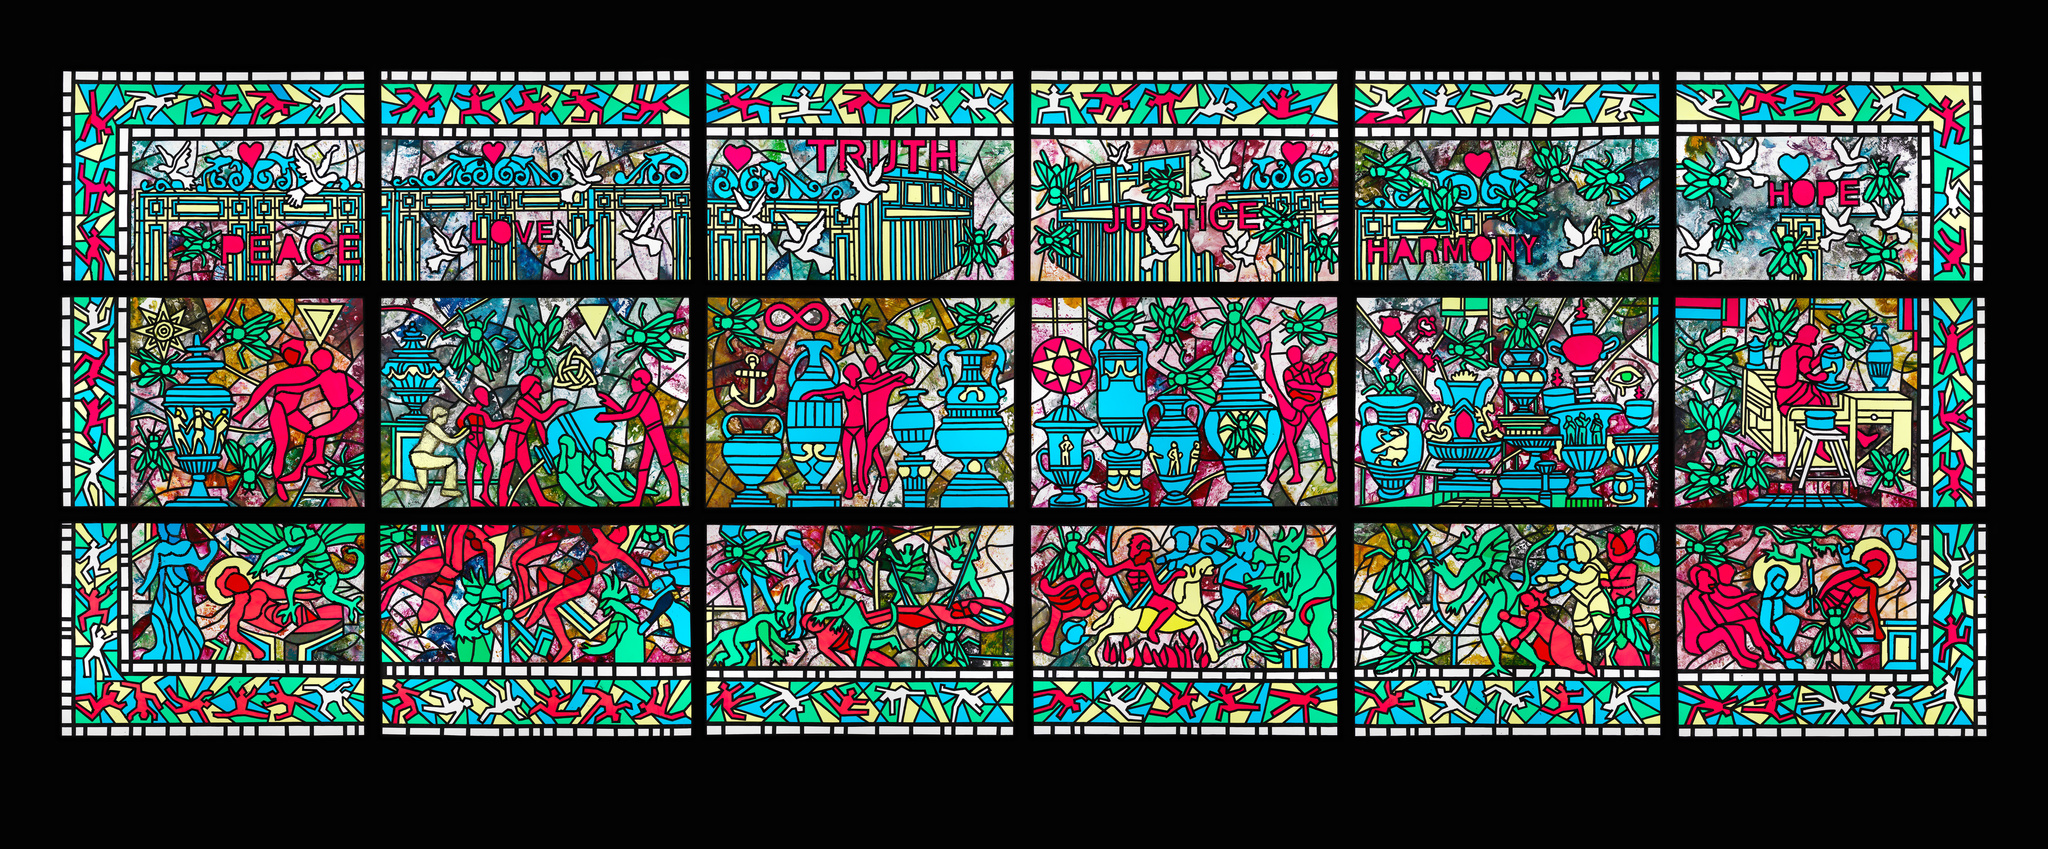 A grand stained glass window mosaic packed with detail: ruby red figures, text, cool-toned beetles, and vases. Humanoid sculptures stand below the window. 